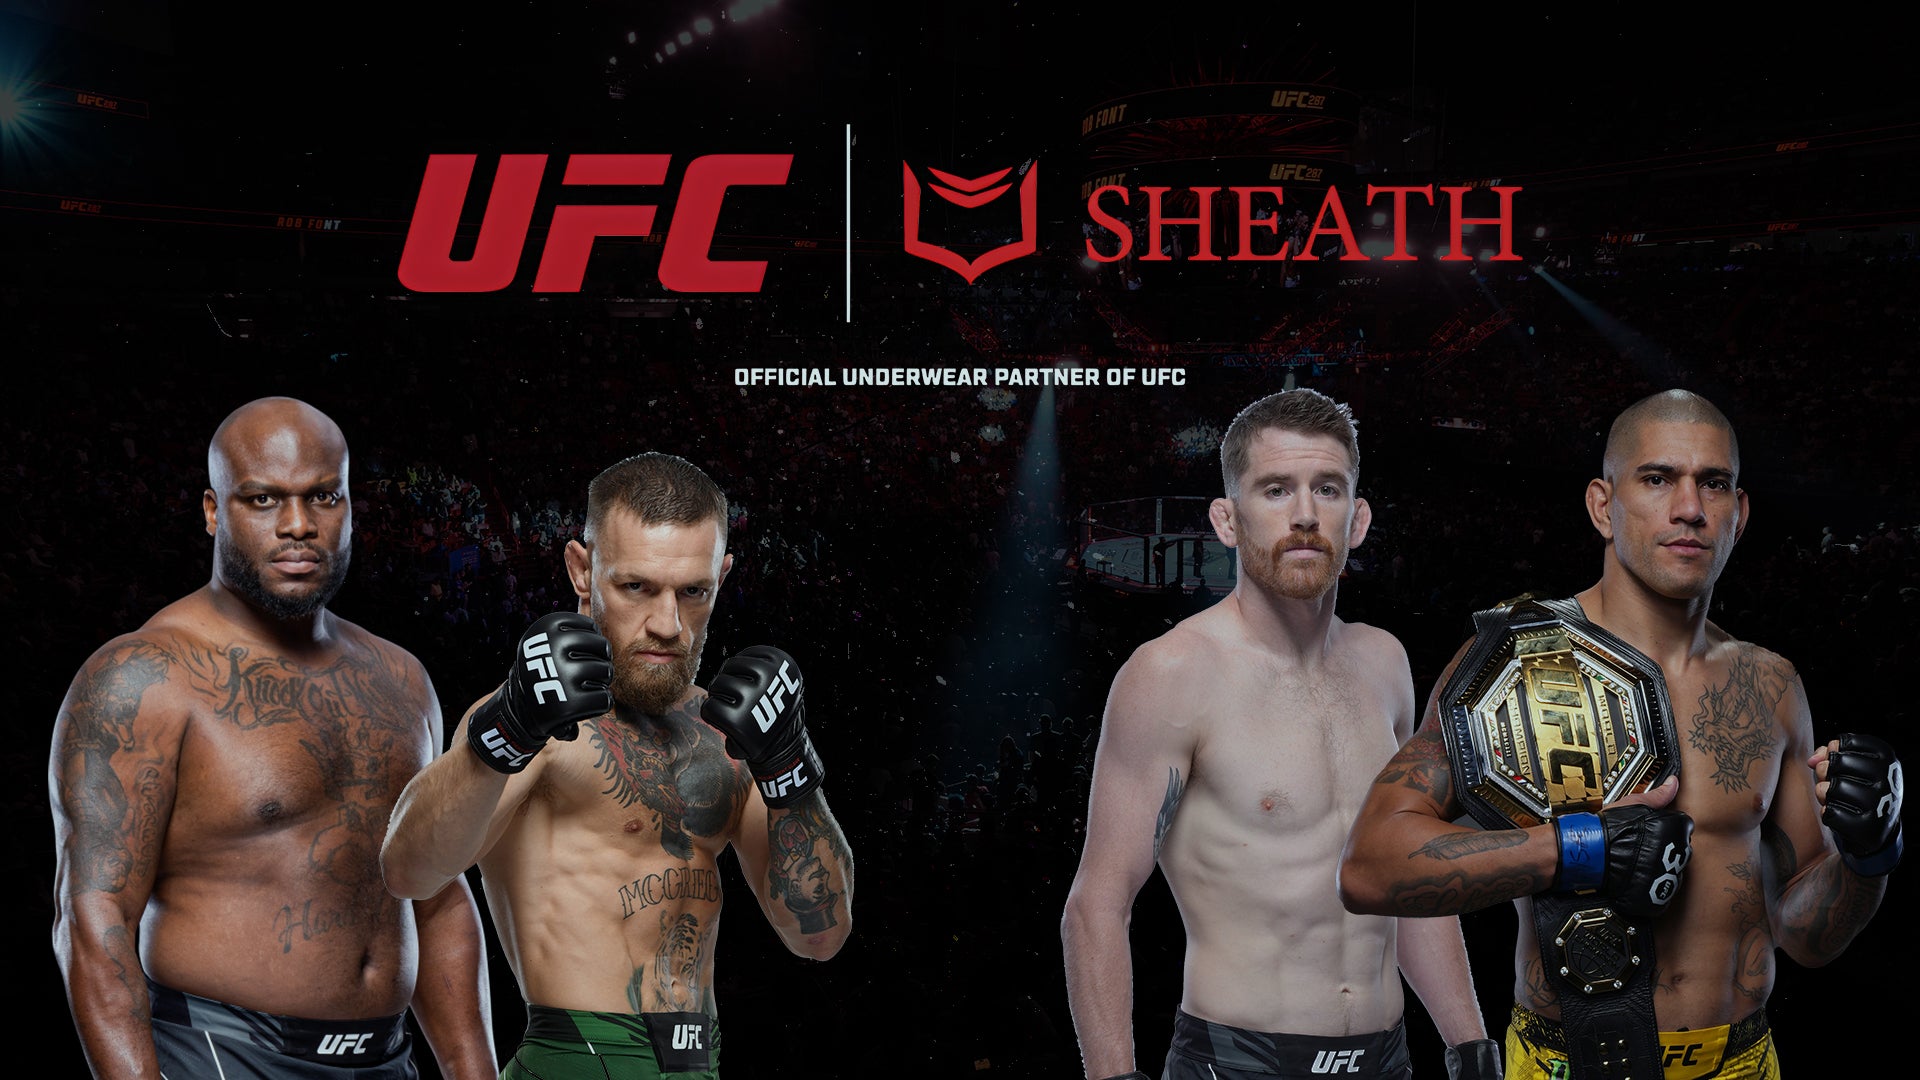 SHEATH and UFC: A Union of Passion and Dedication